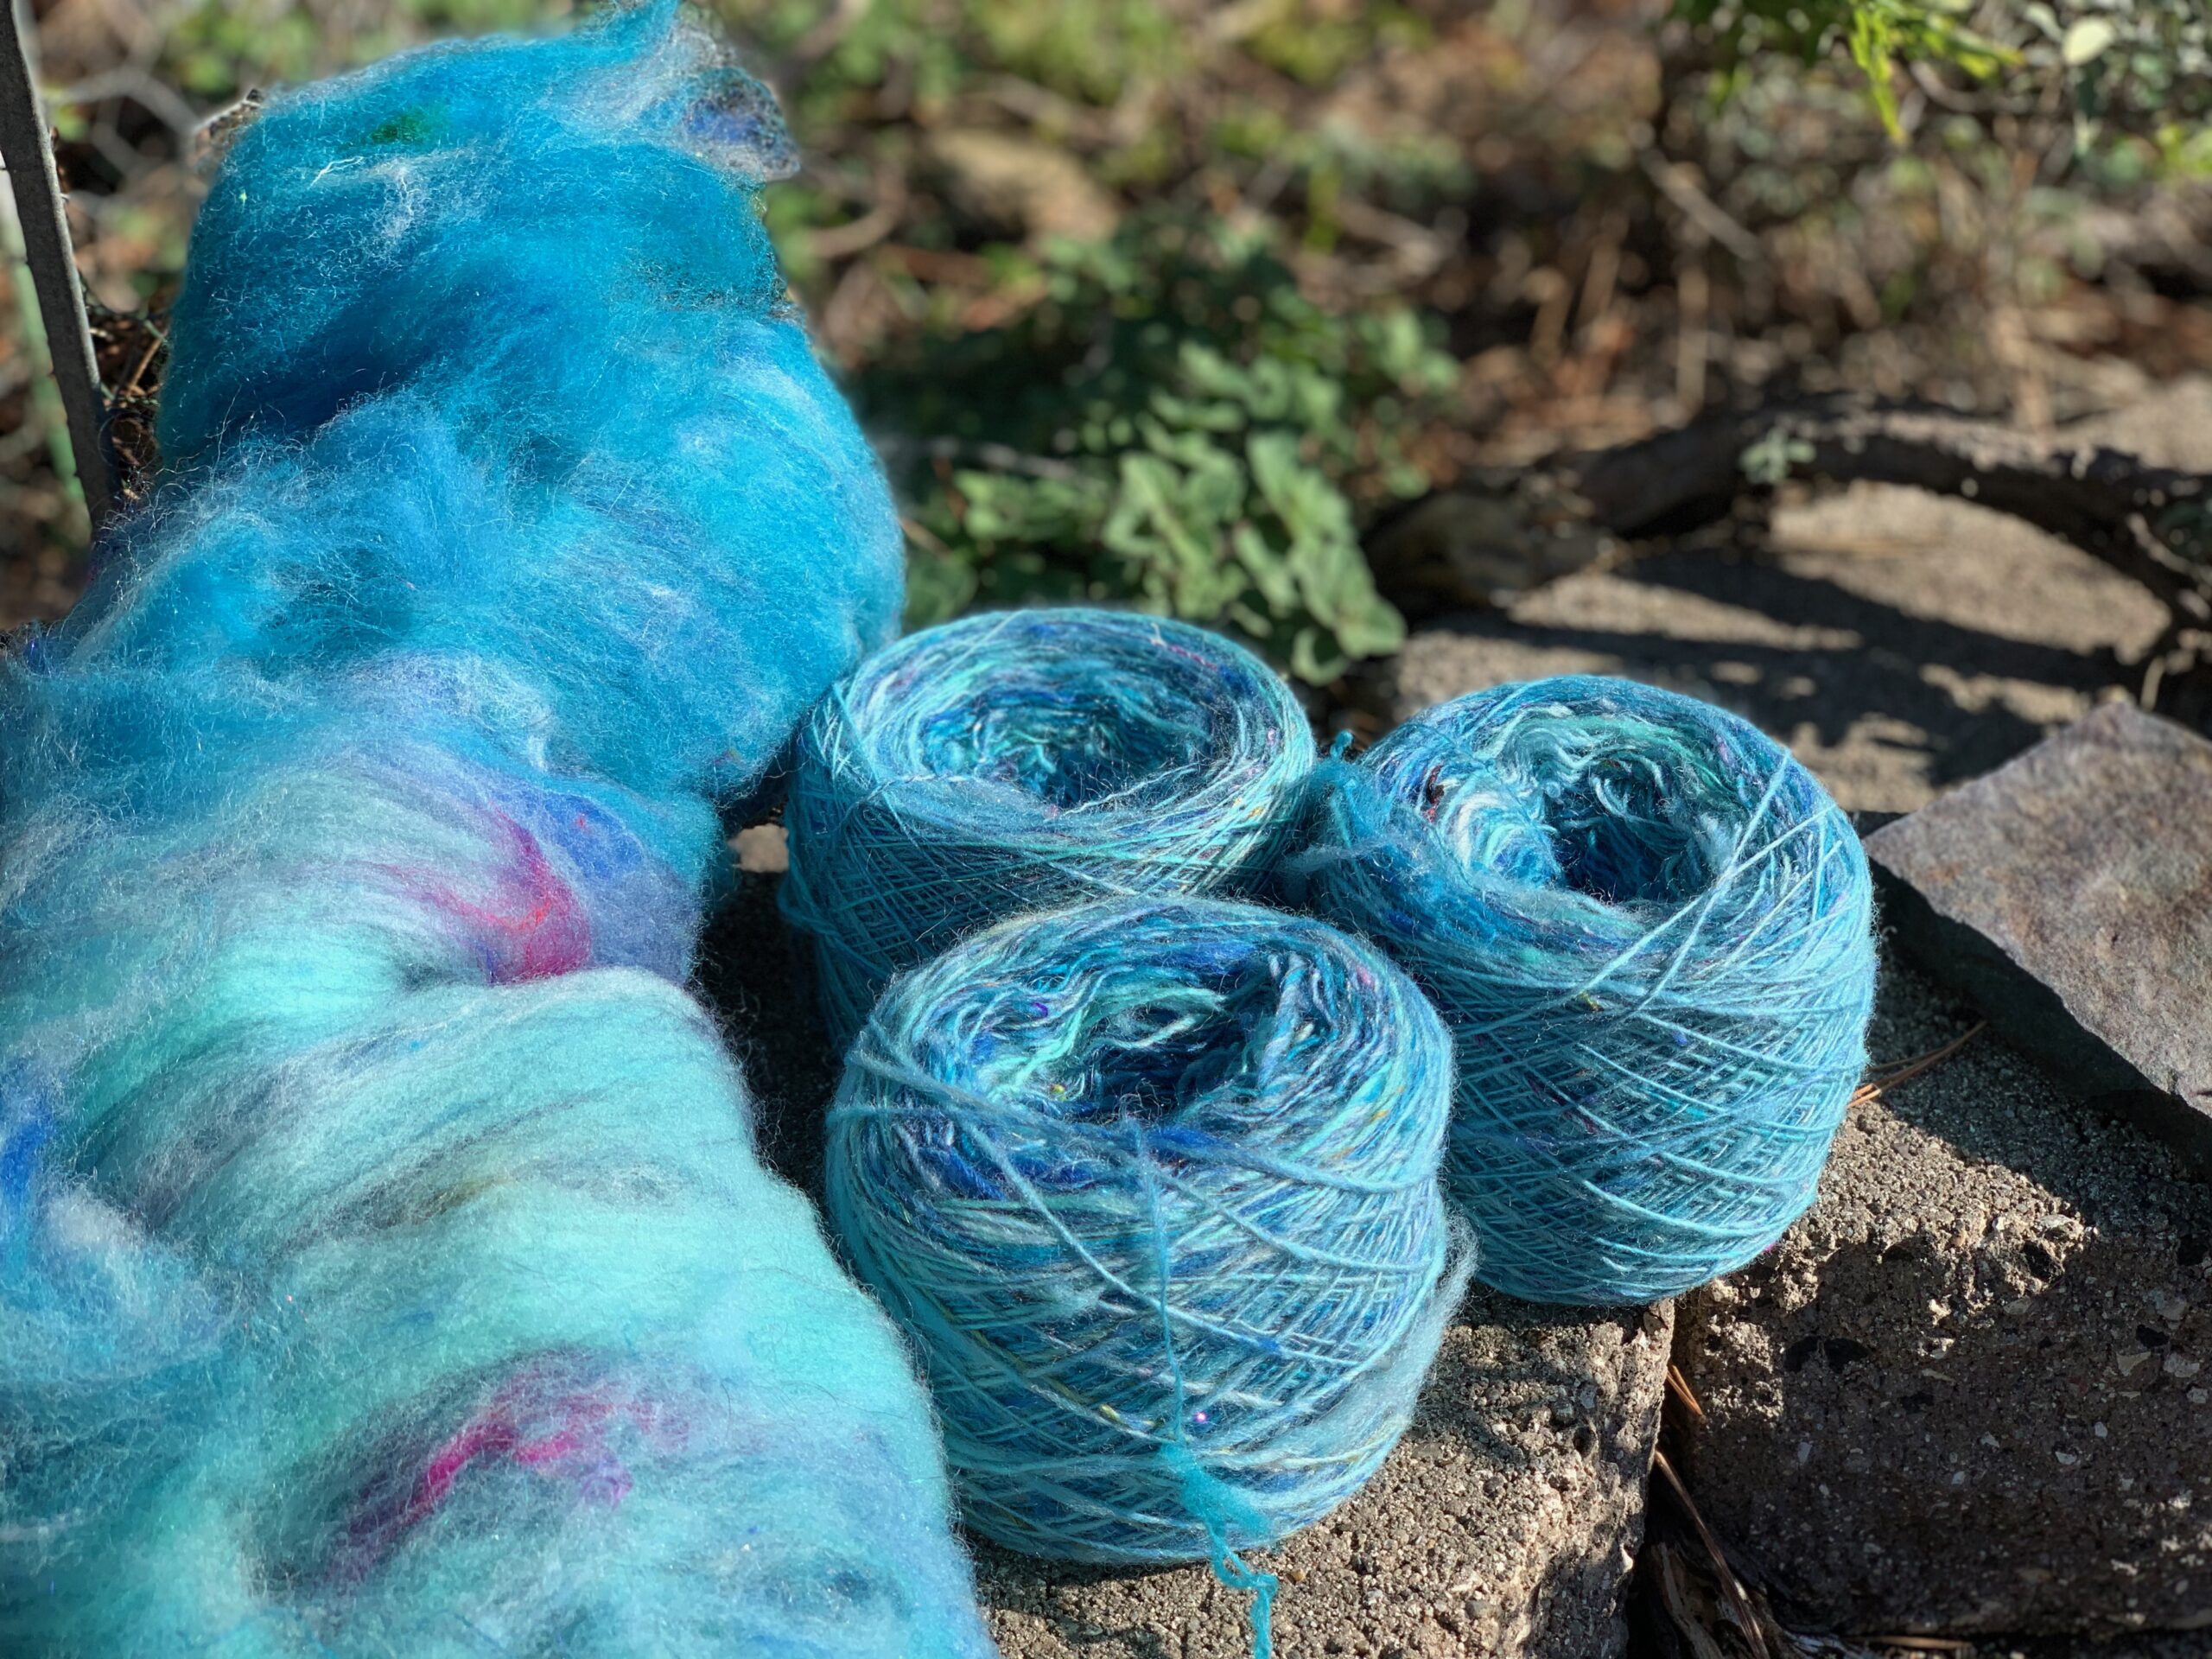 An outdoor staging of the fiber batt and three cakes of singles spun from the same fiber. As in the previous image, the colors are in shades of blues with occasional spots of purple.